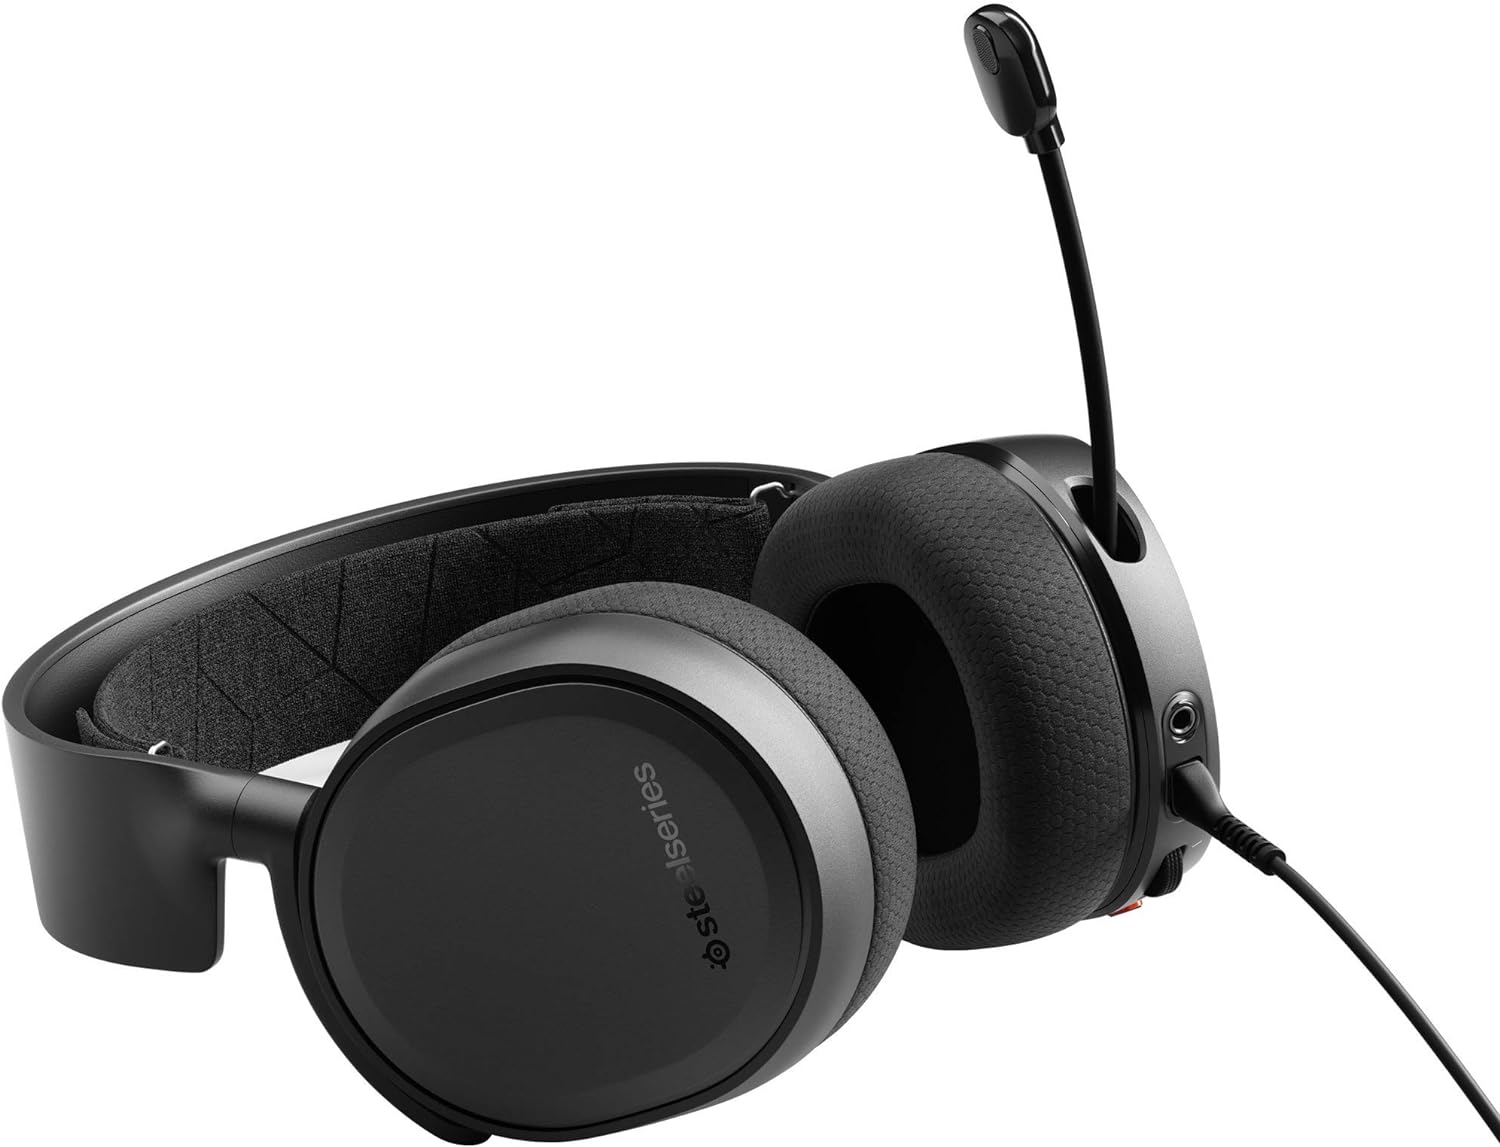 SteelSeries Arctis 1 Wireless - Draadloze Gaming Headset - USB-C Draadloos - Afneembare ClearCast-microfoon - PC, PS5, PS4, Xbox, Nintendo Switch, Android